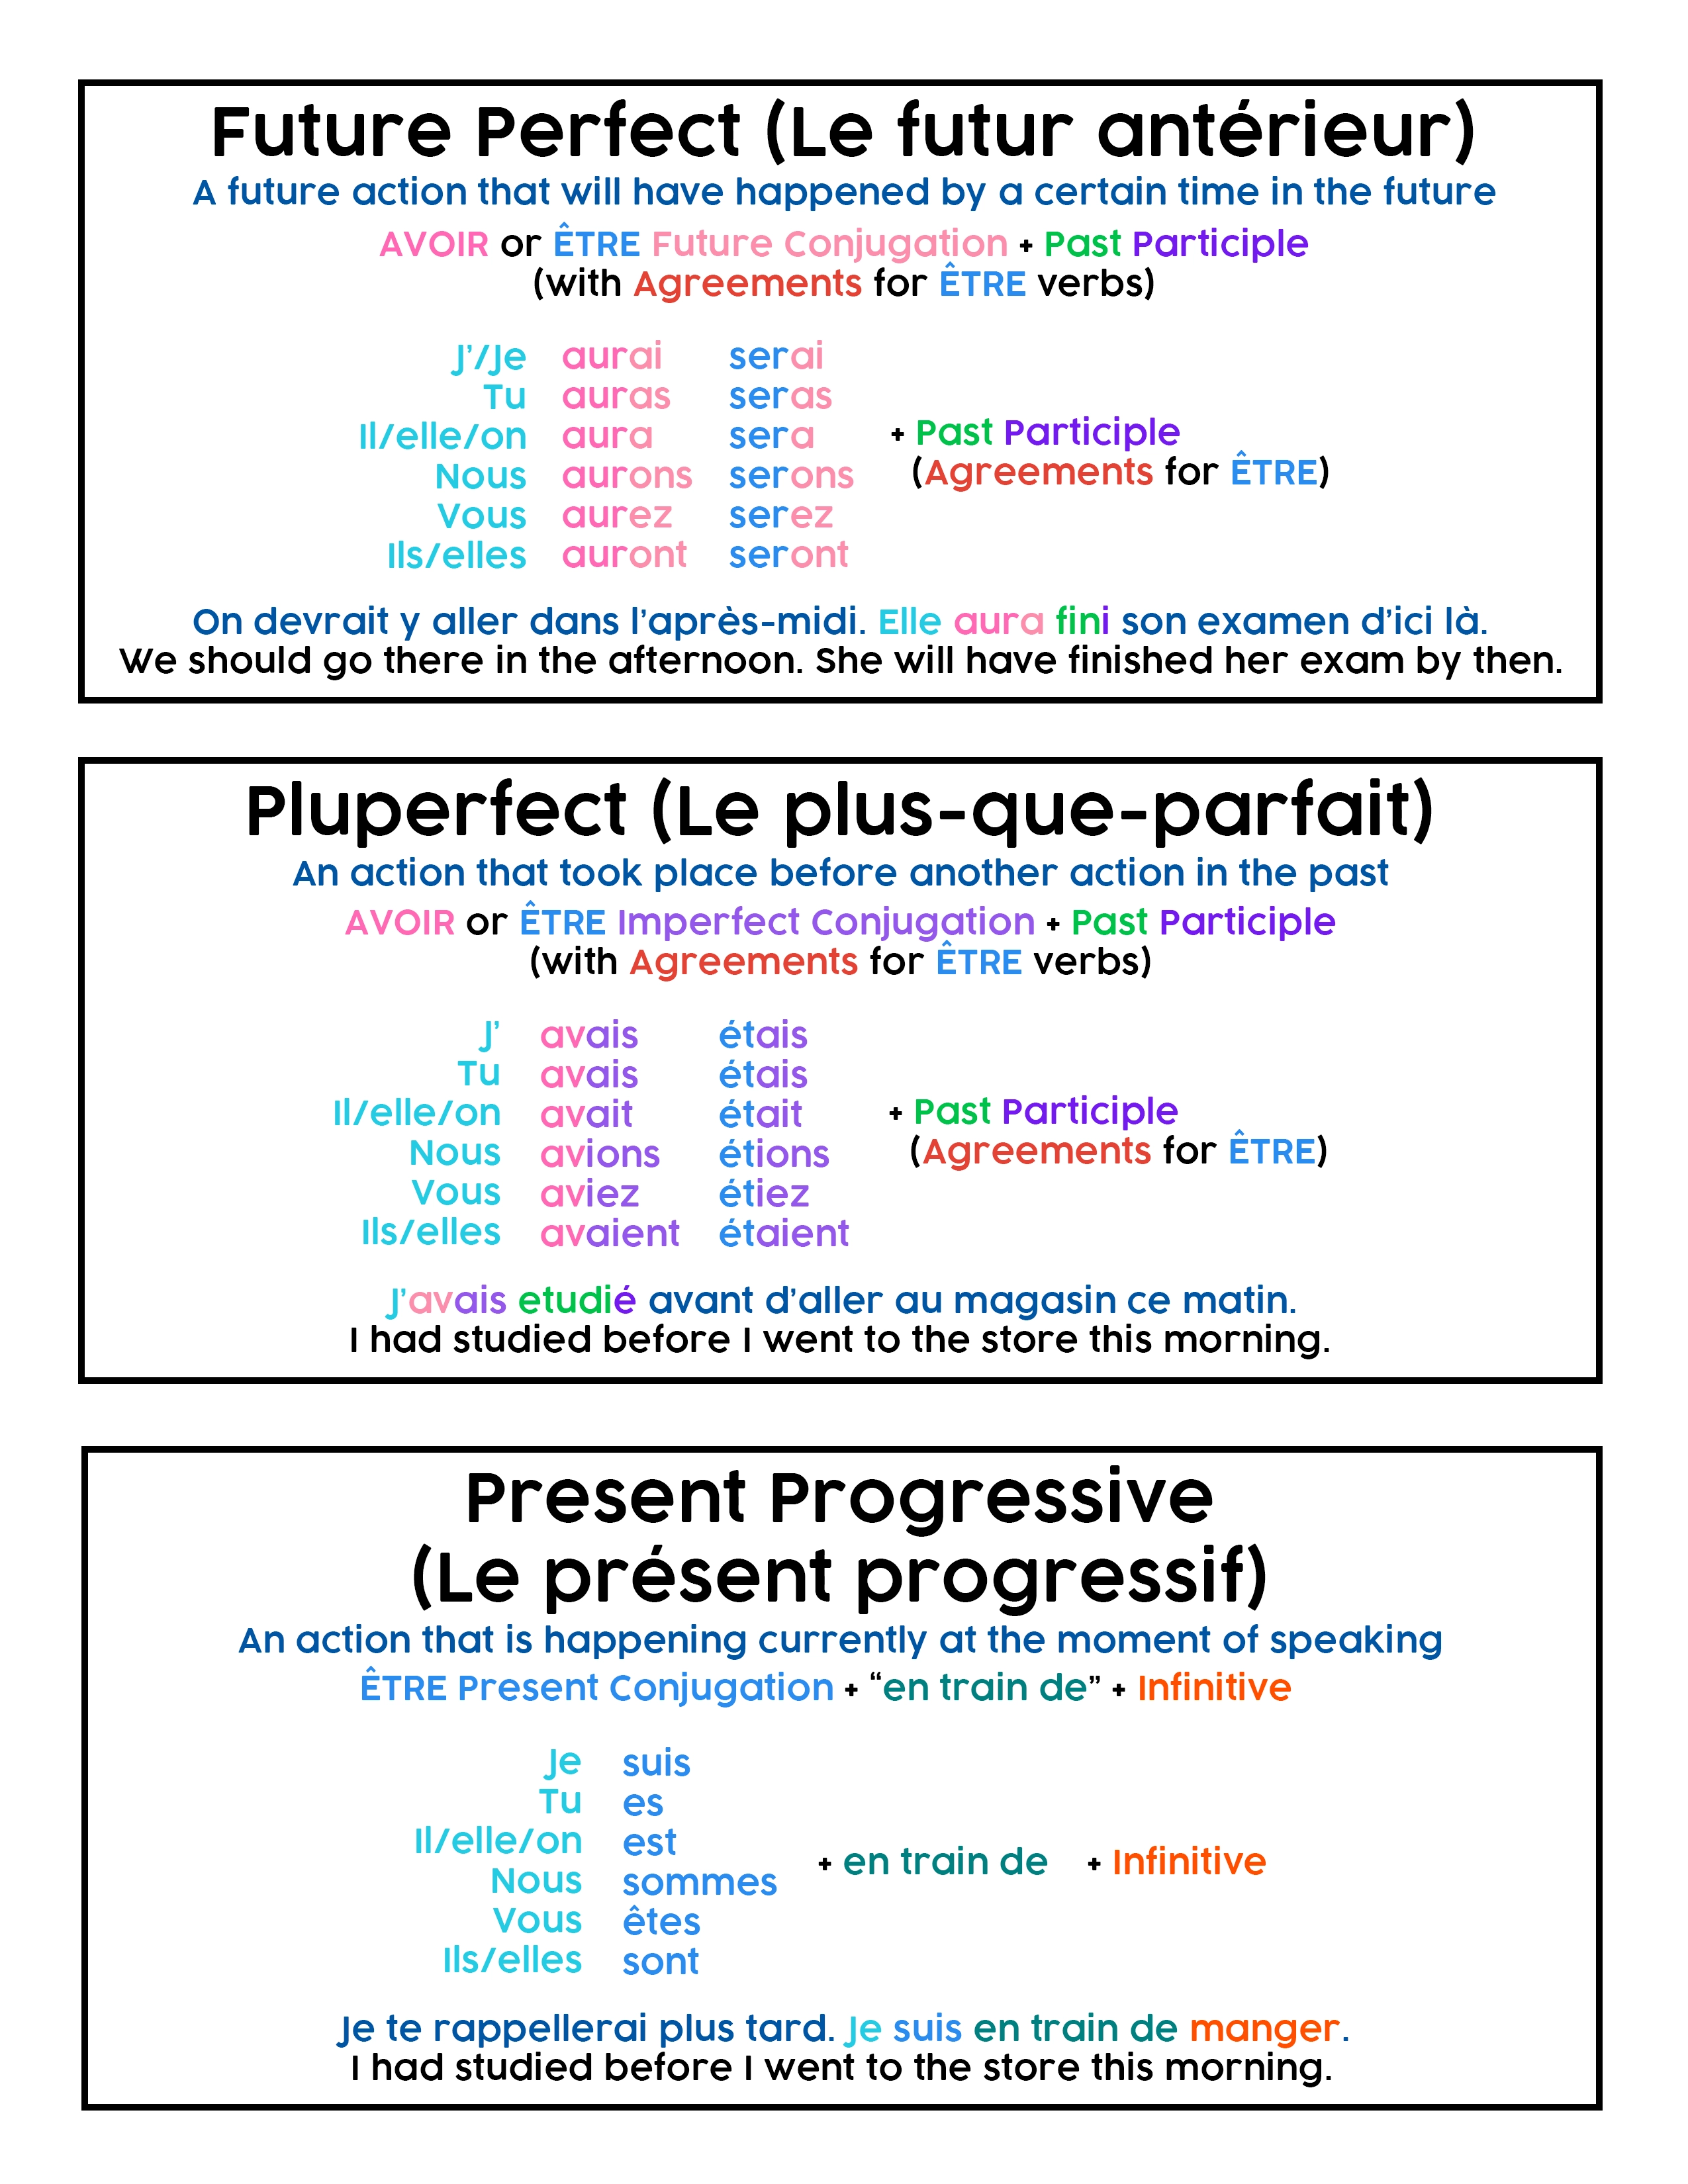 1672-french---future-perfect-pluperfect-present-pro-complete-16971597041538.png